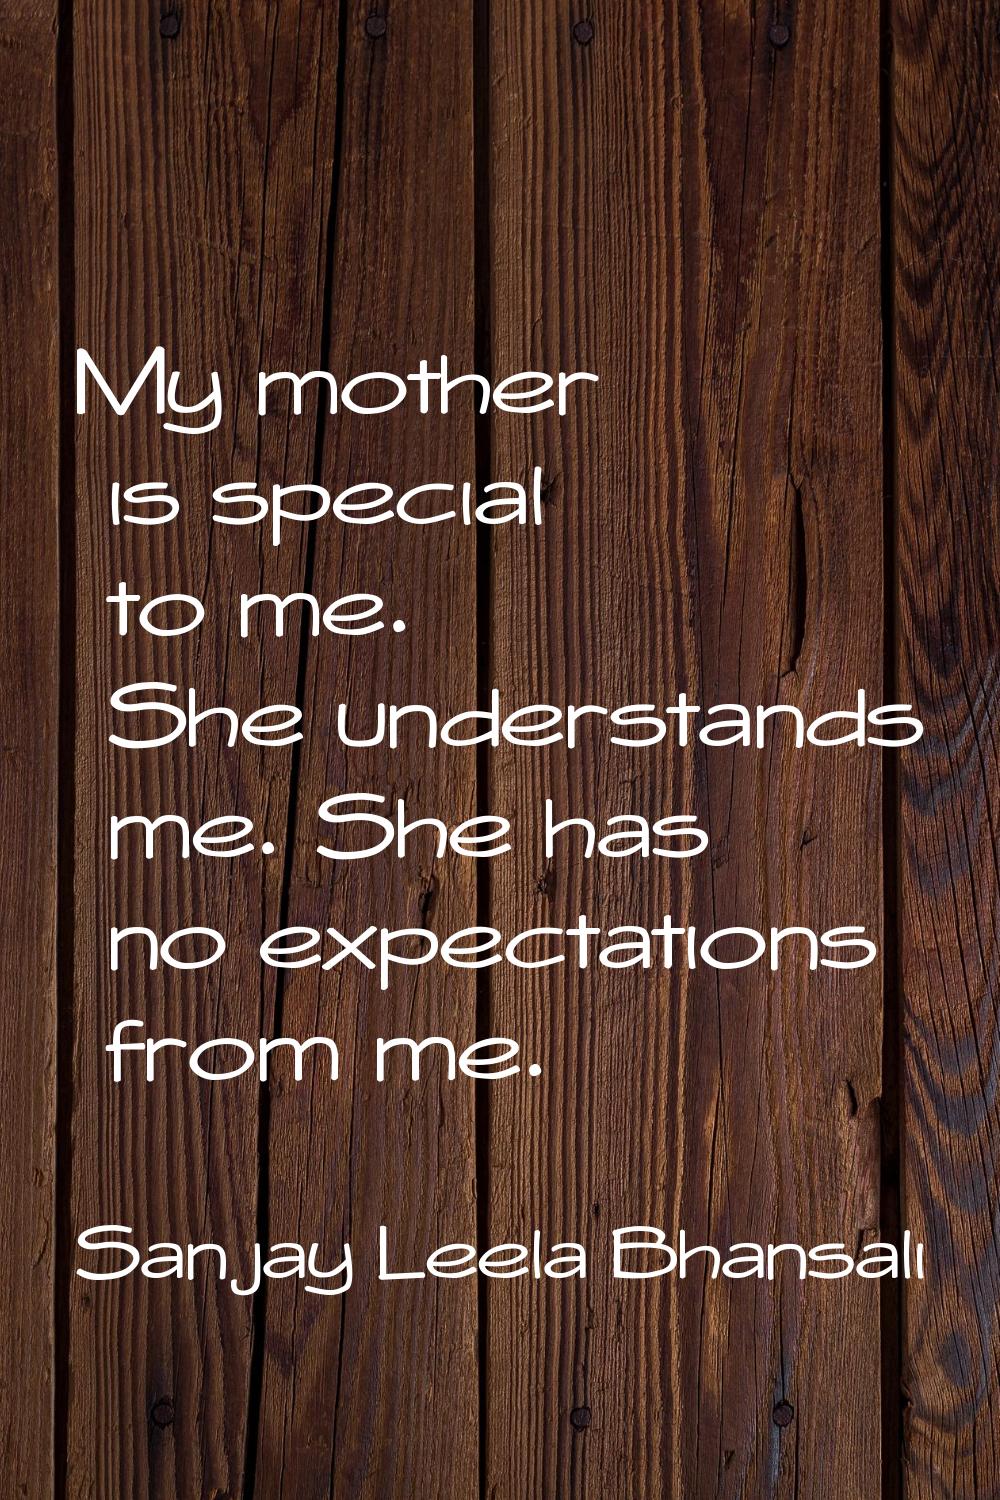 My mother is special to me. She understands me. She has no expectations from me.